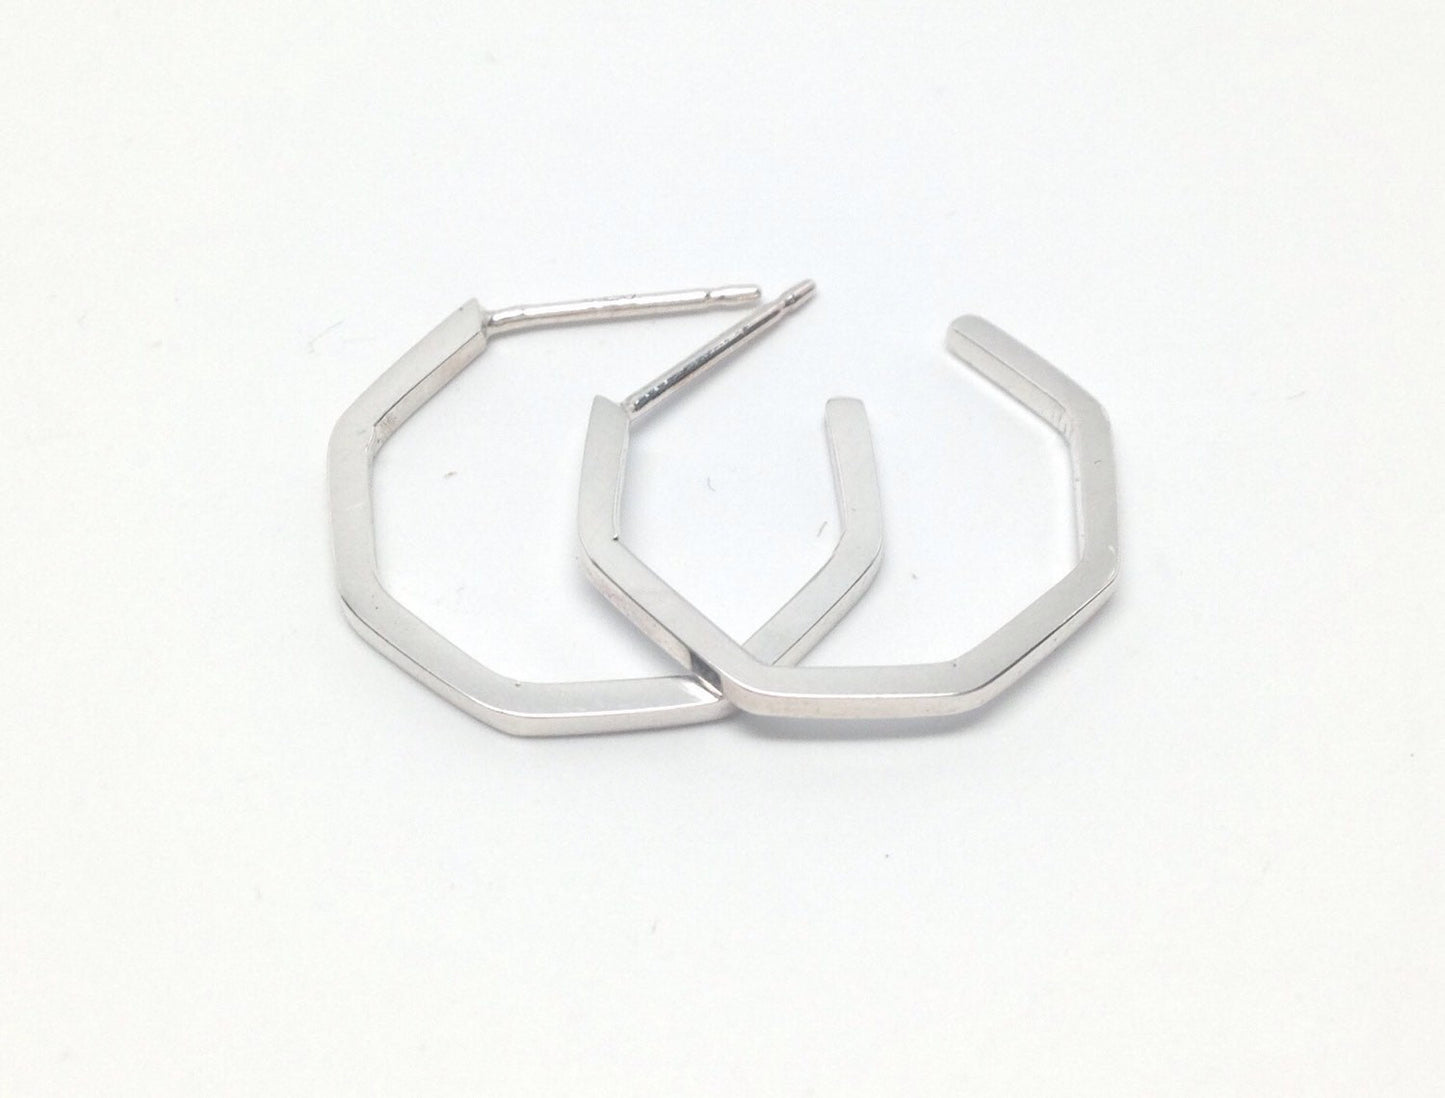 A pair of small sterling silver handmade geometric hoop earrings on a white background  